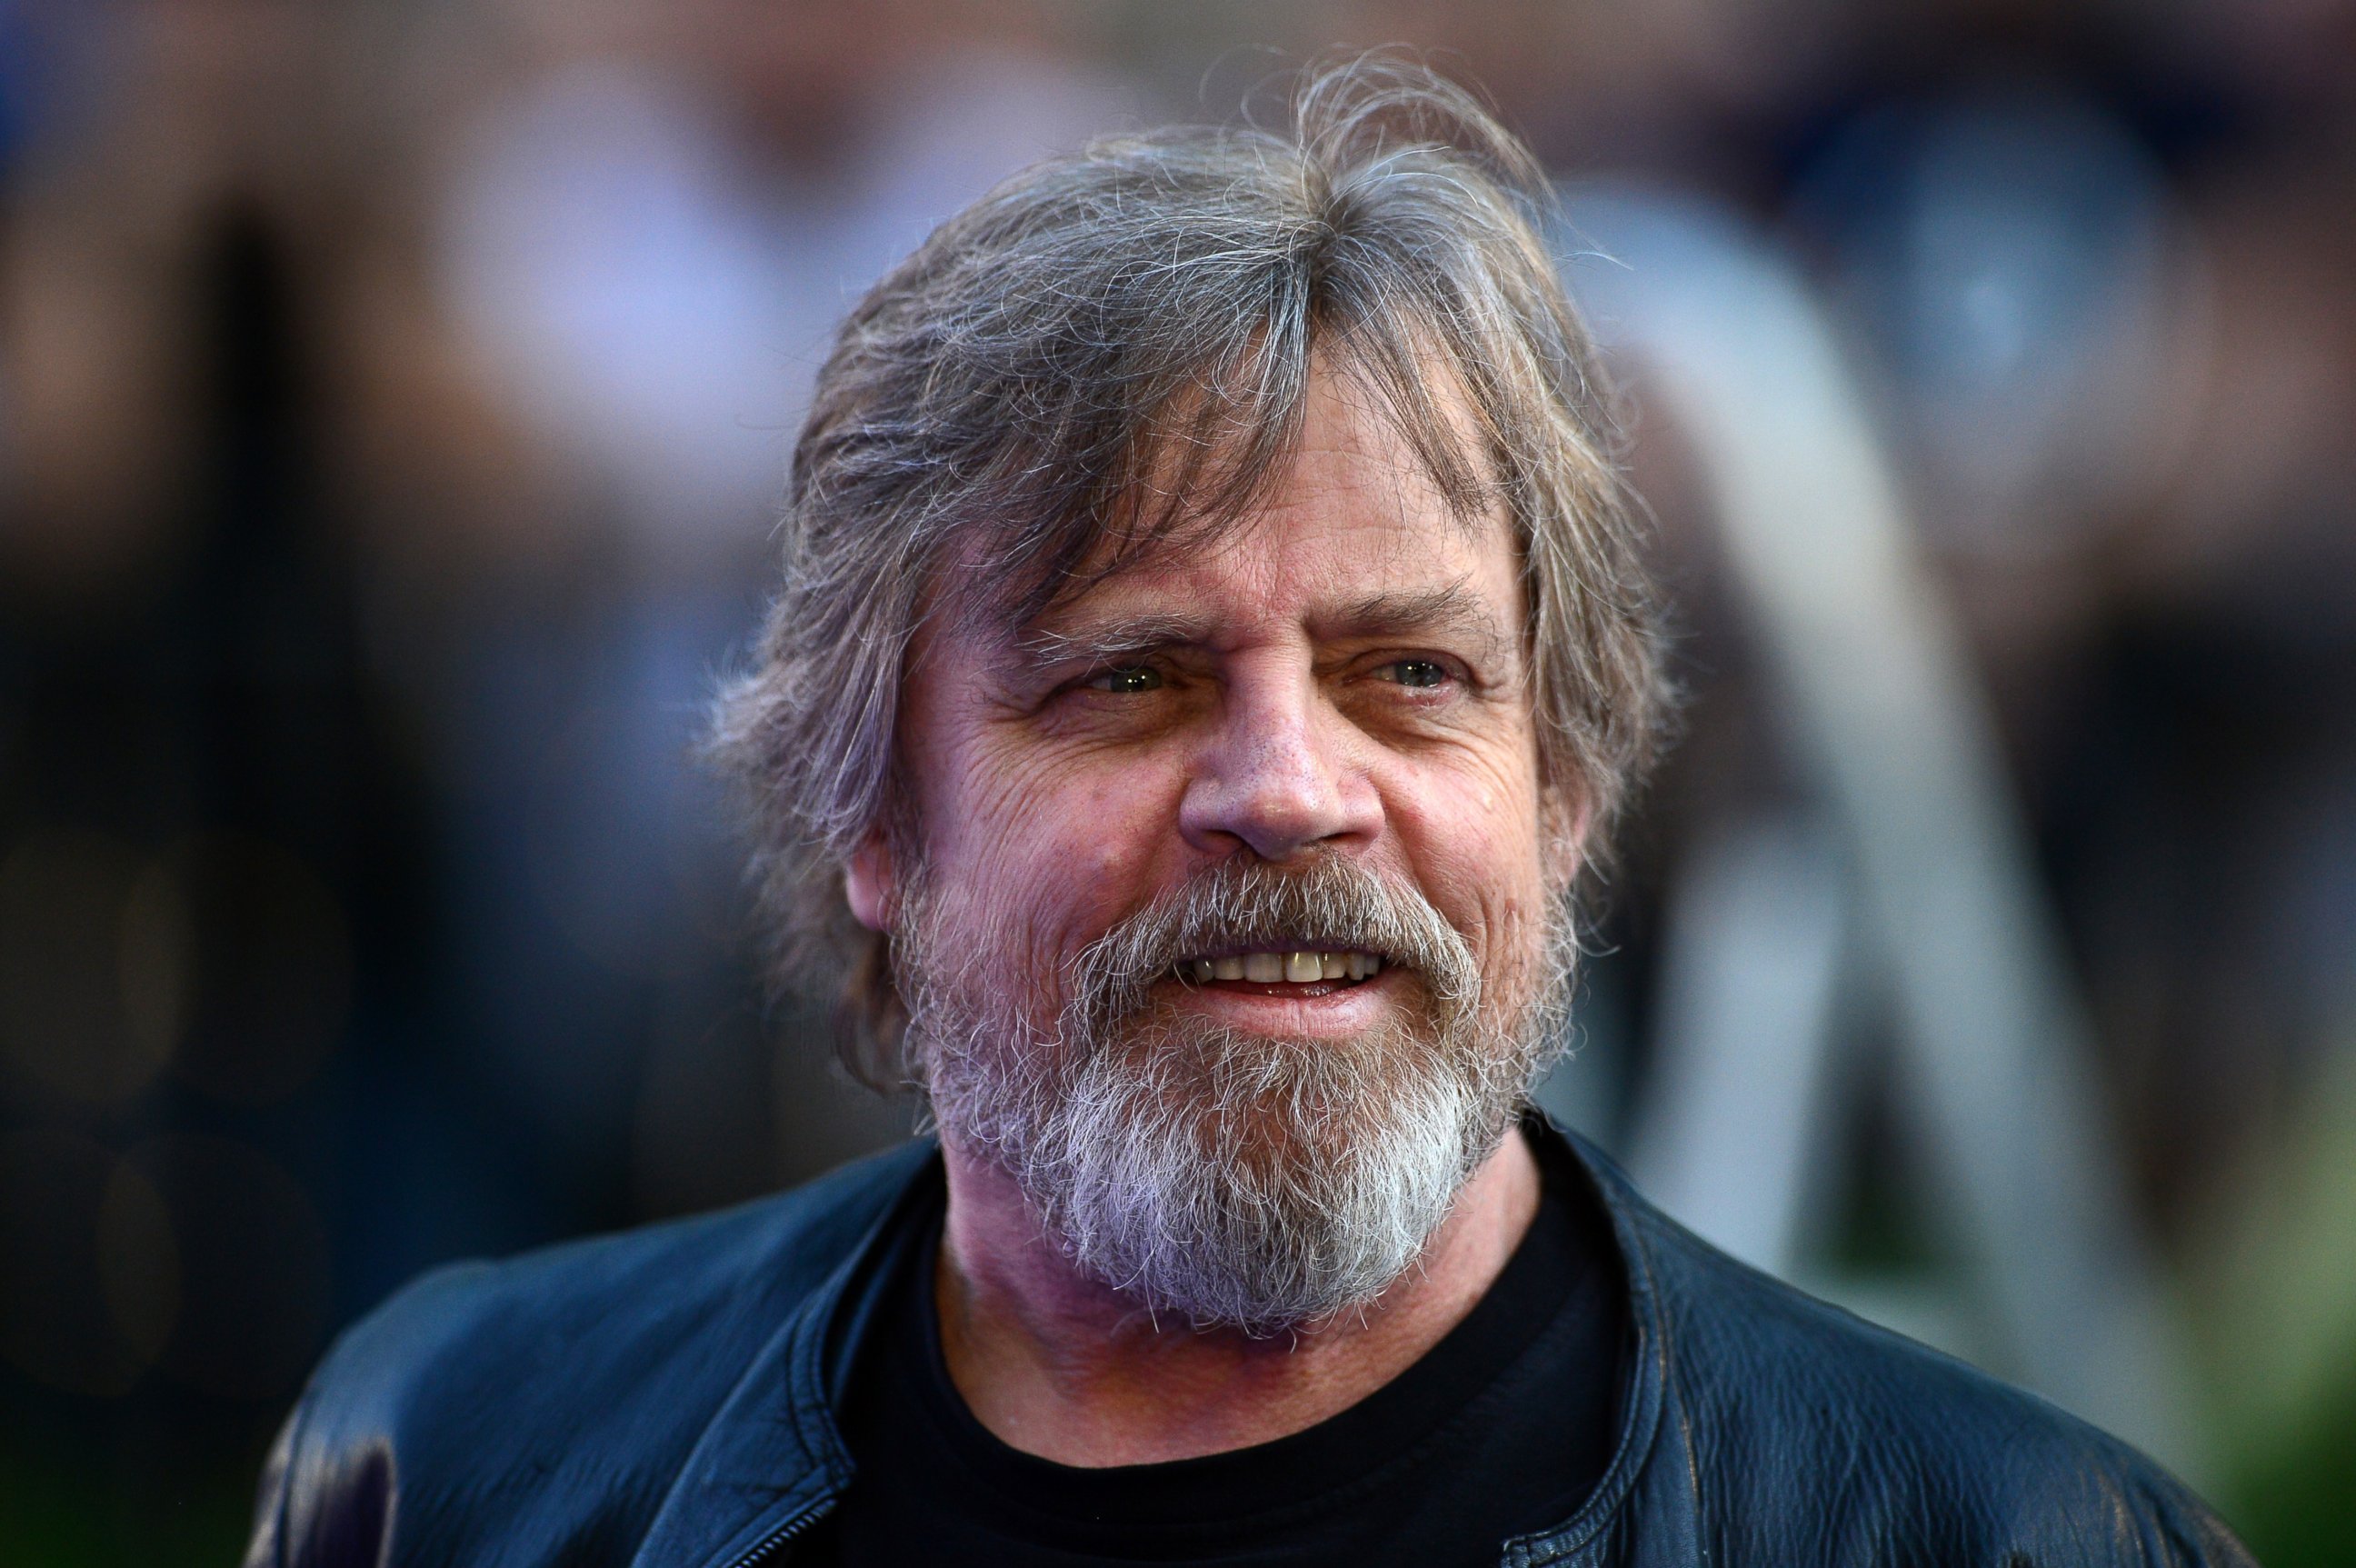 PHOTO: Mark Hamill attends the European premiere of "Guardians of the Galaxy" in London